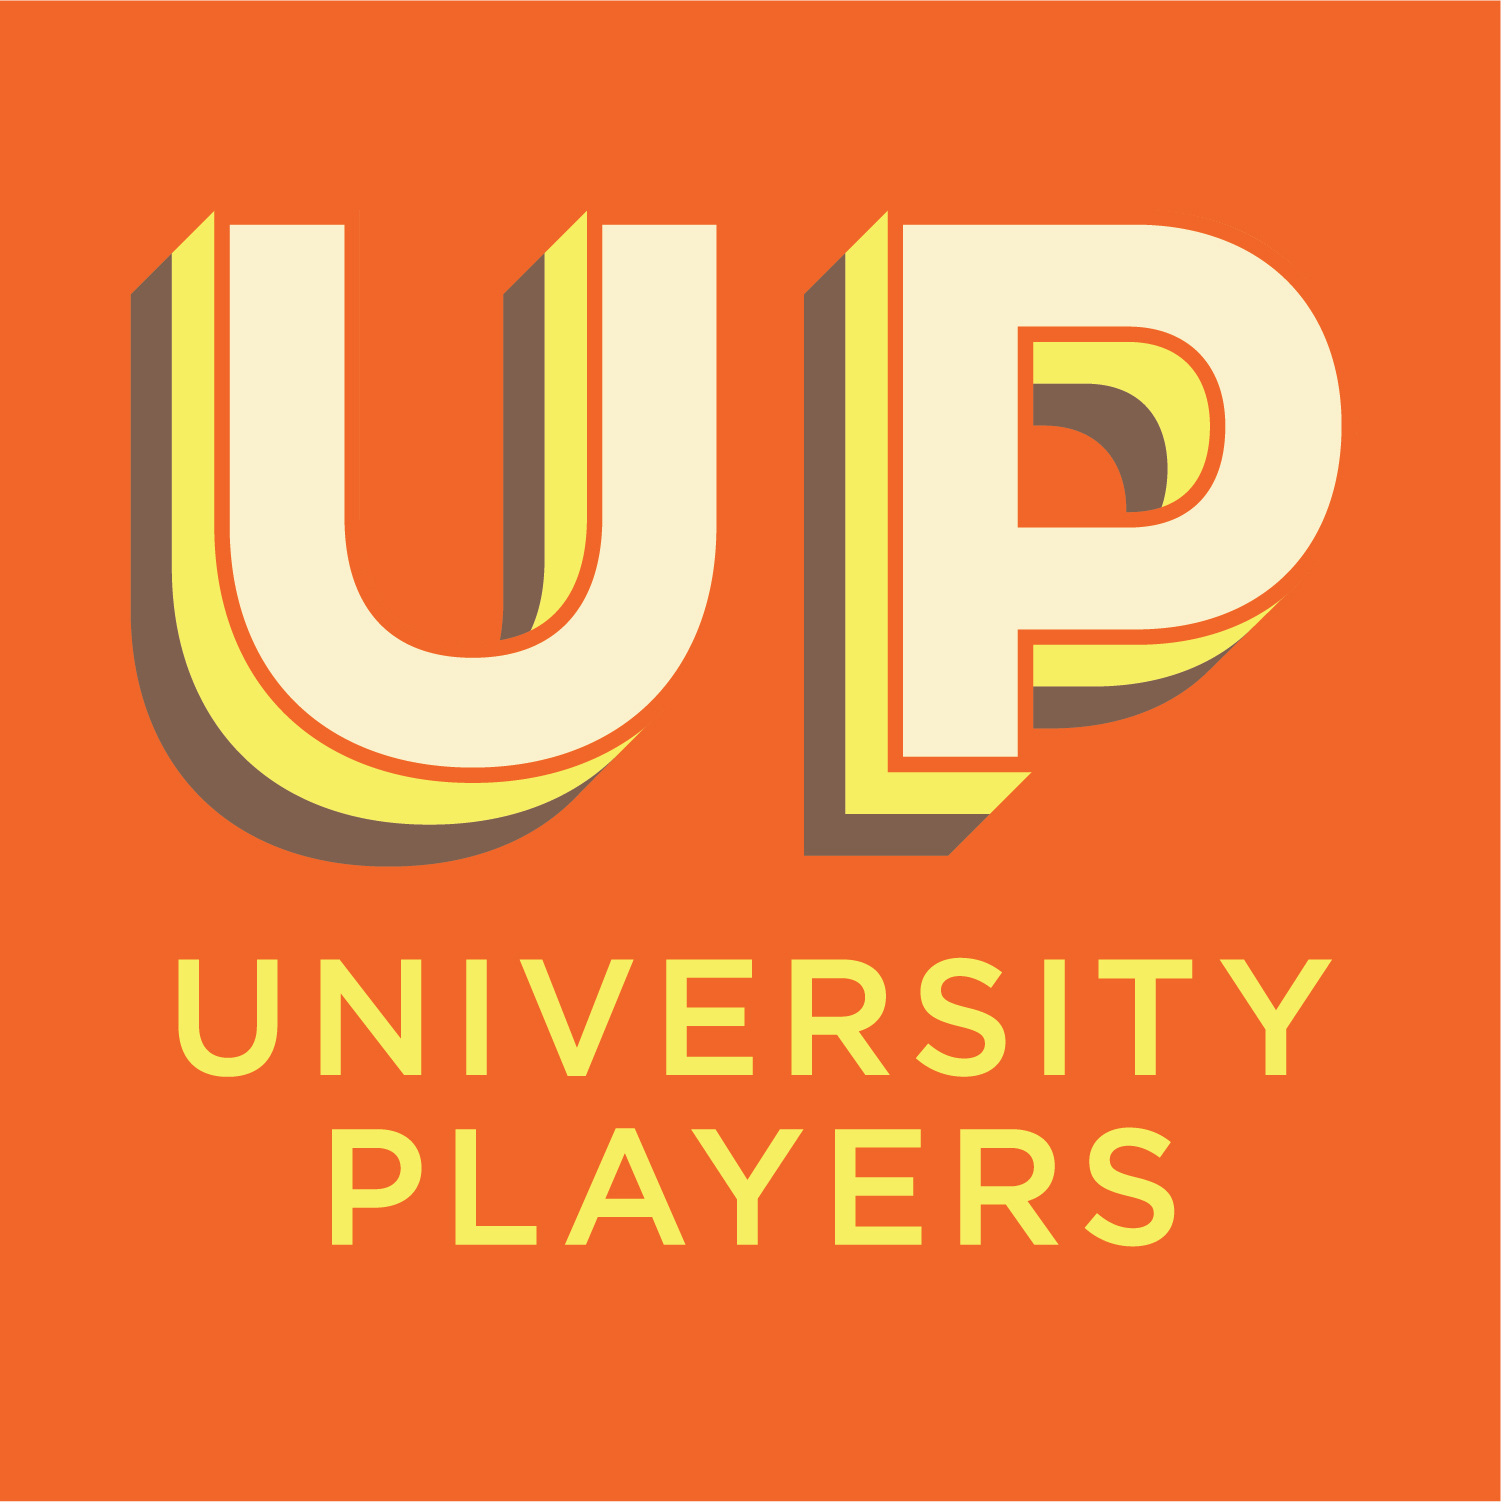 Sunday Morning Live - The Wolves from University Players